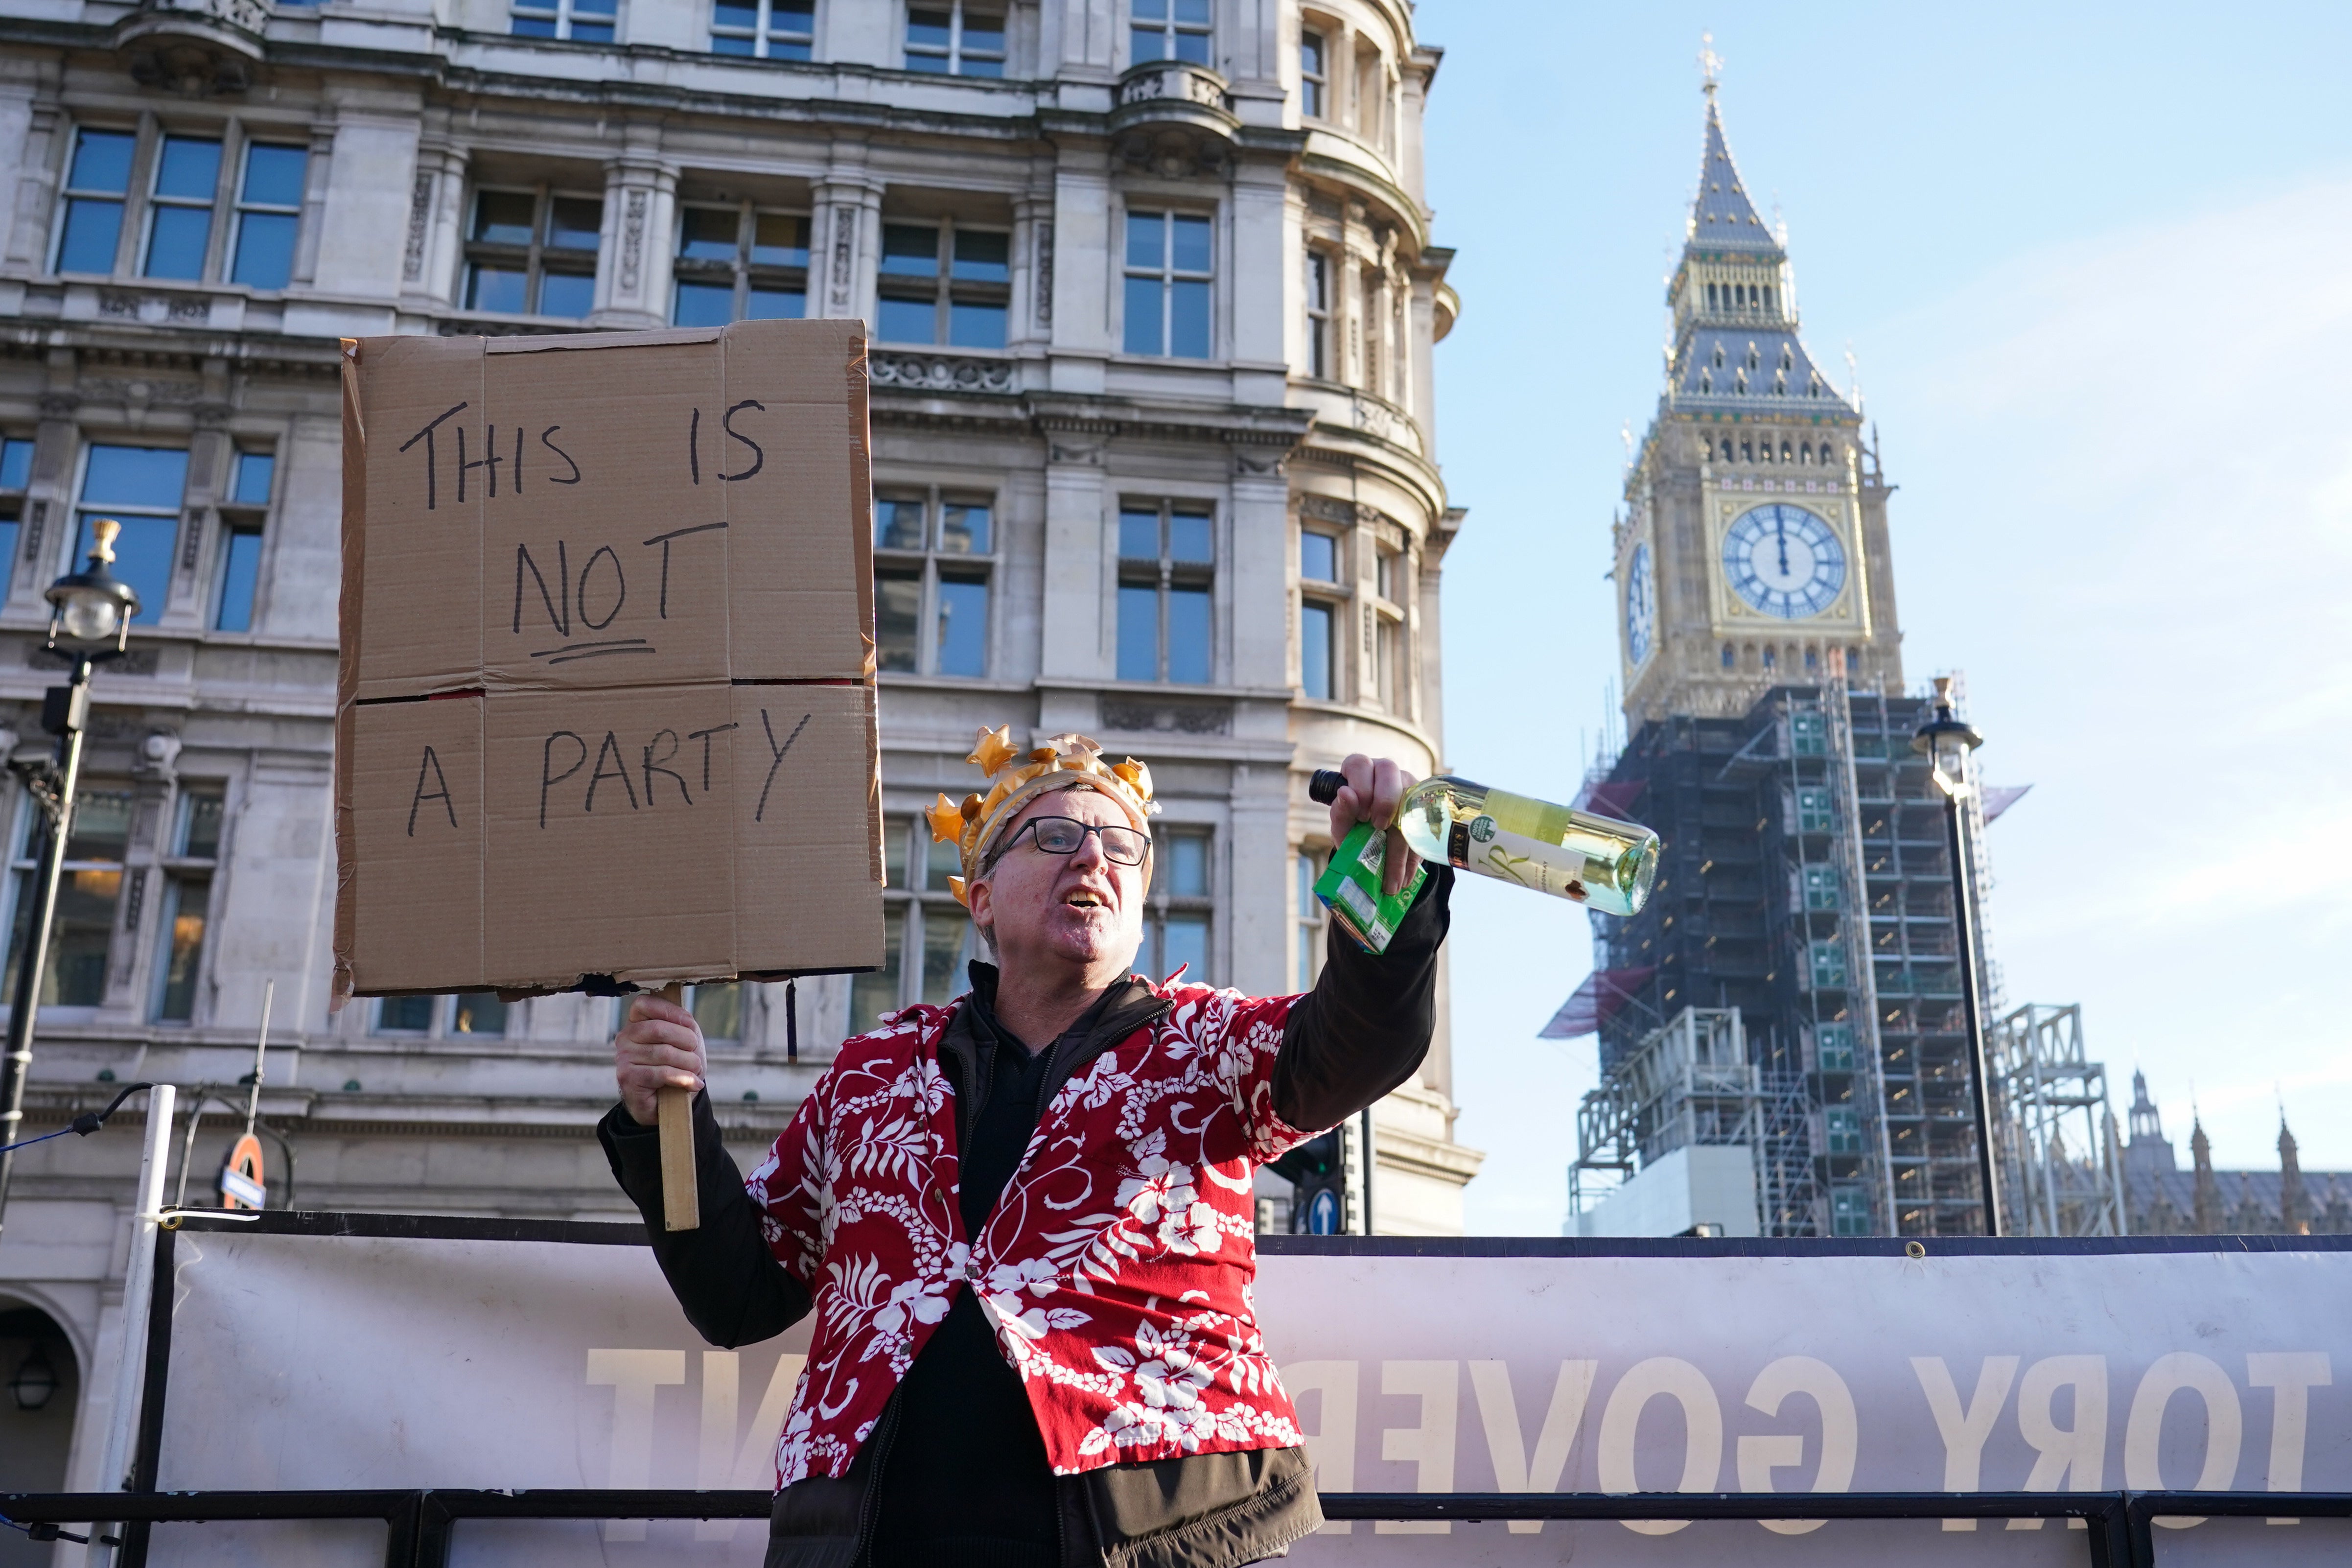 A protester in Parliament Square in Westminster (Dominic Lipinski/PA Wire)